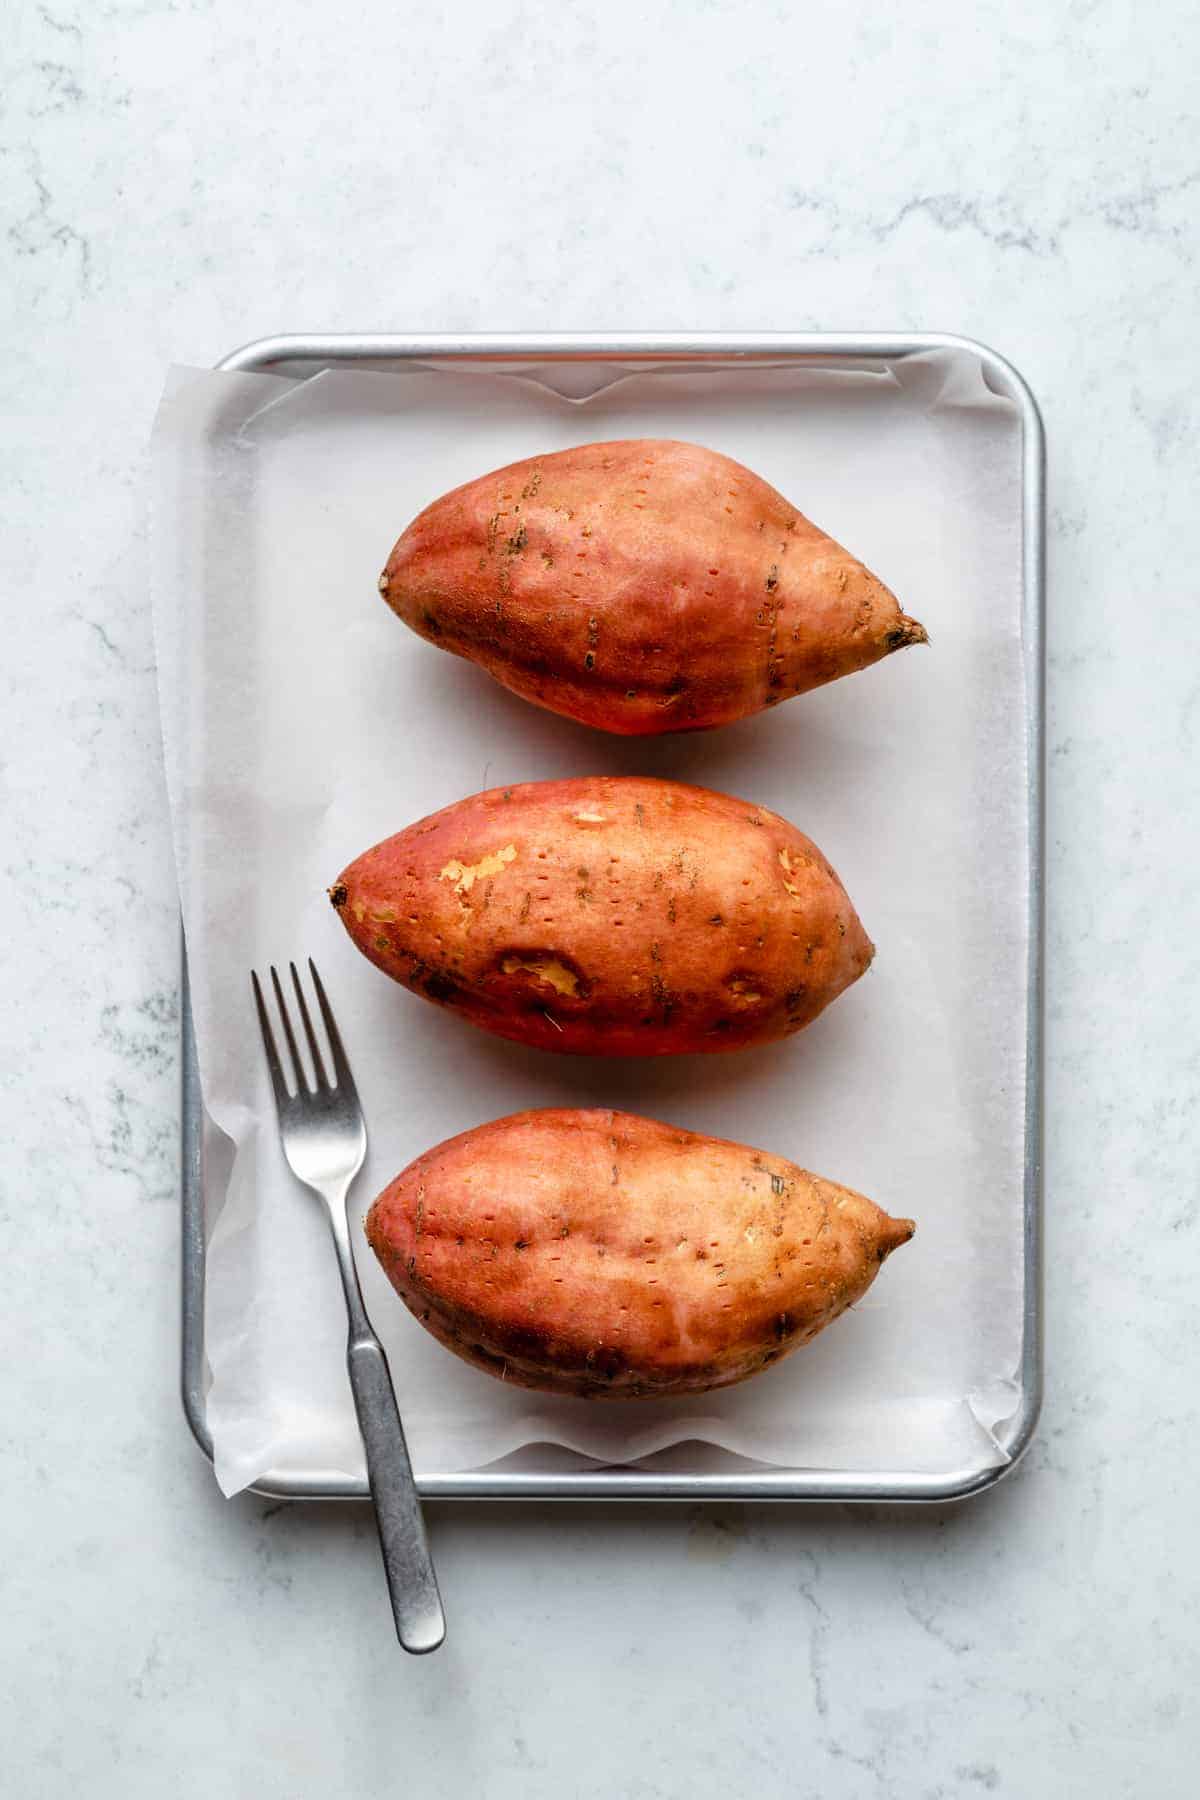 Overhead view of 3 sweet potatoes on baking sheet with fork